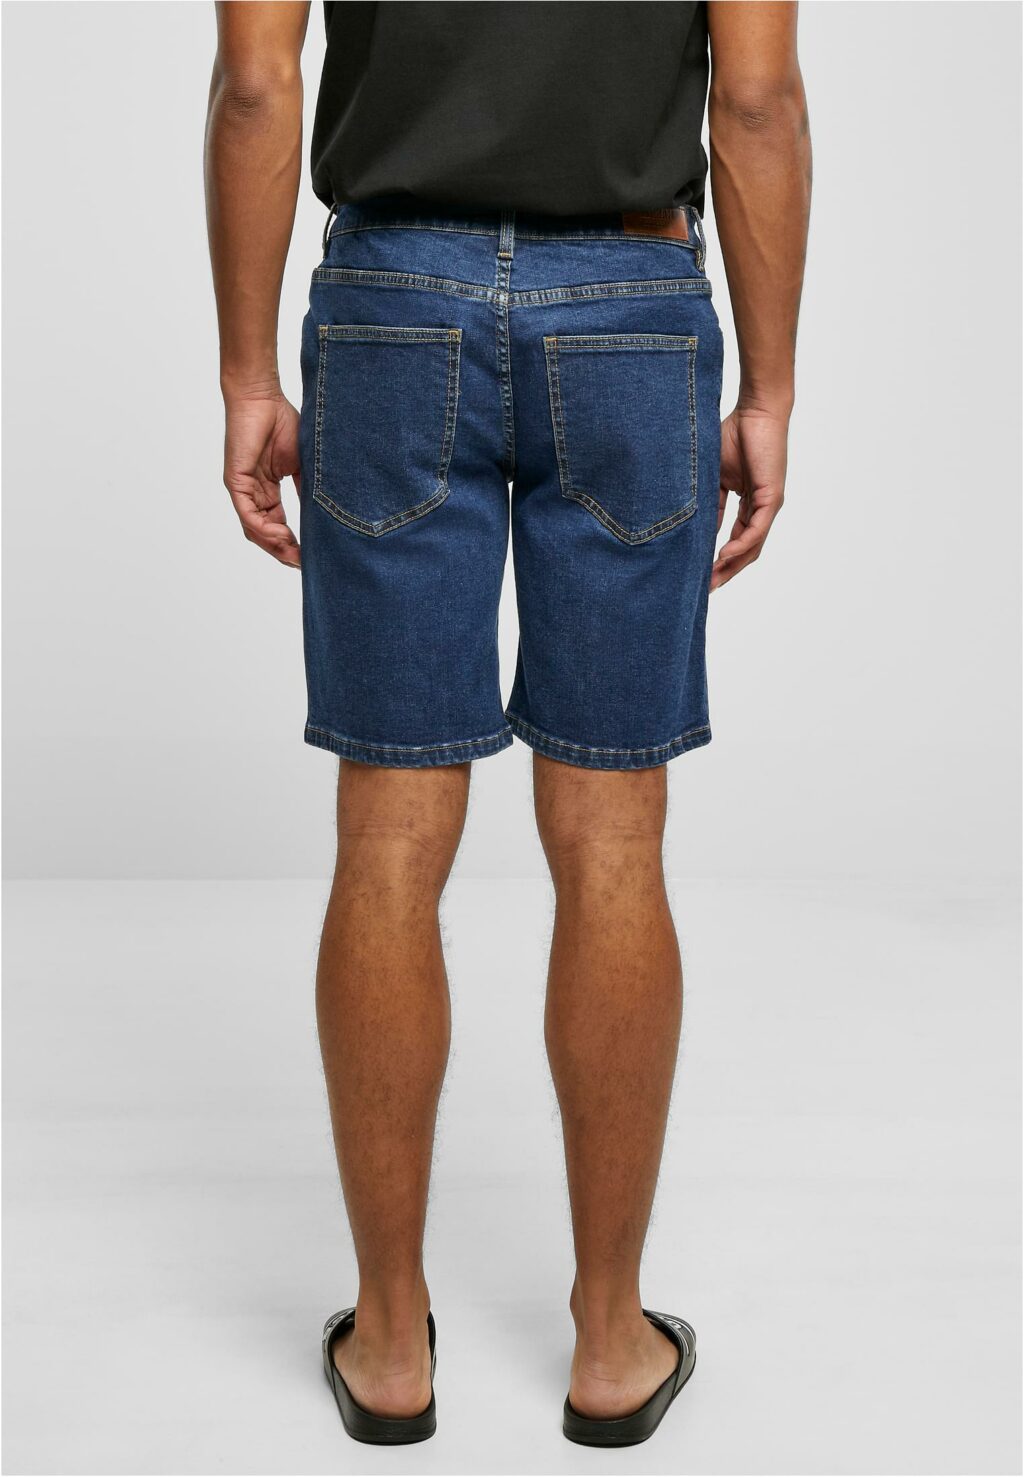 Urban Classics Relaxed Fit Jeans Shorts mid indigo washed TB4156